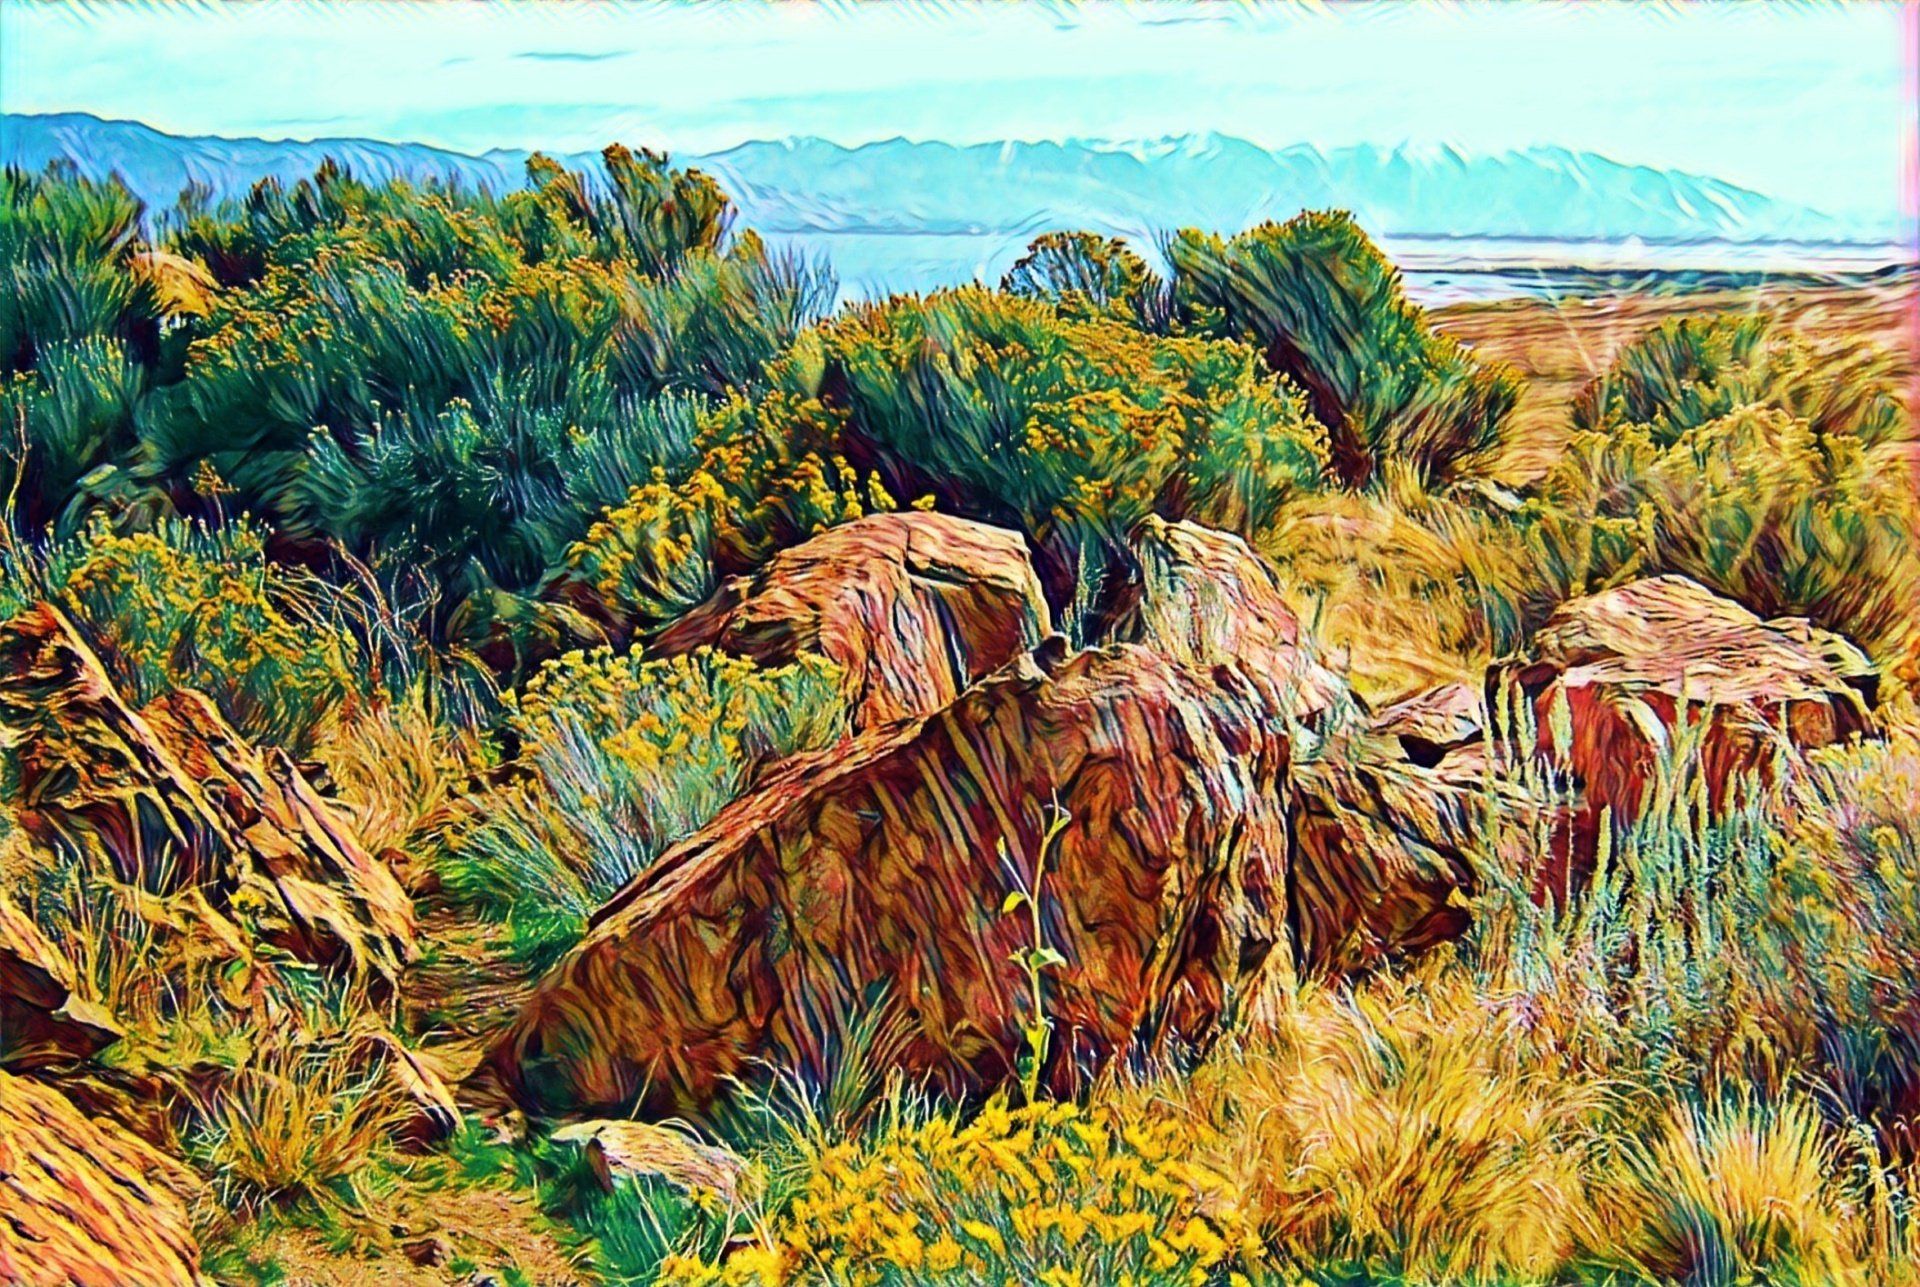 desert scene with rocks and bushes